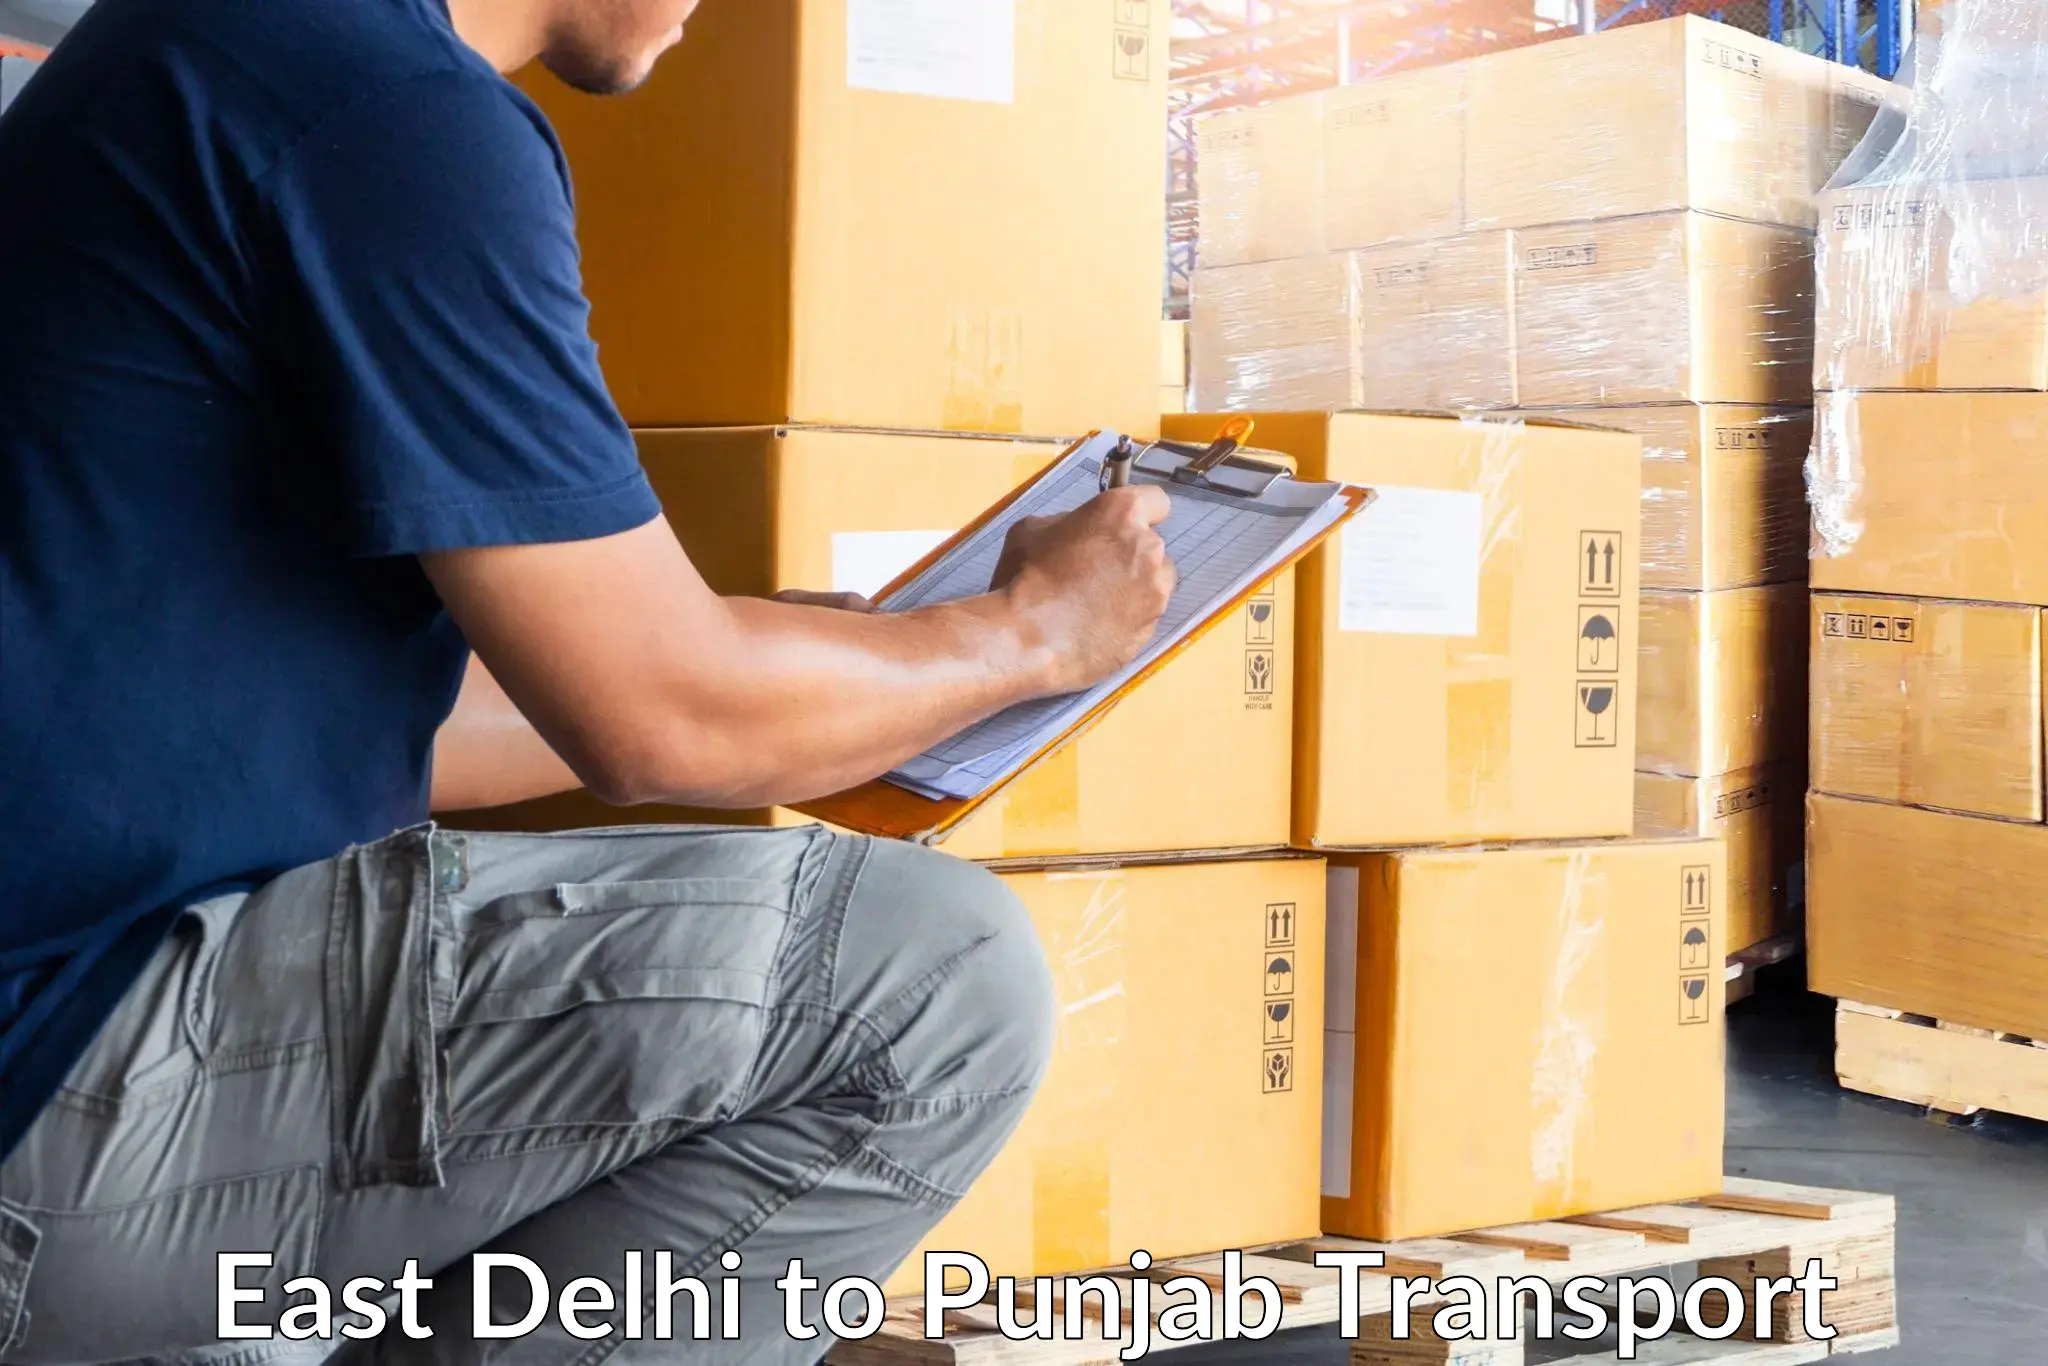 Container transport service East Delhi to Firozpur